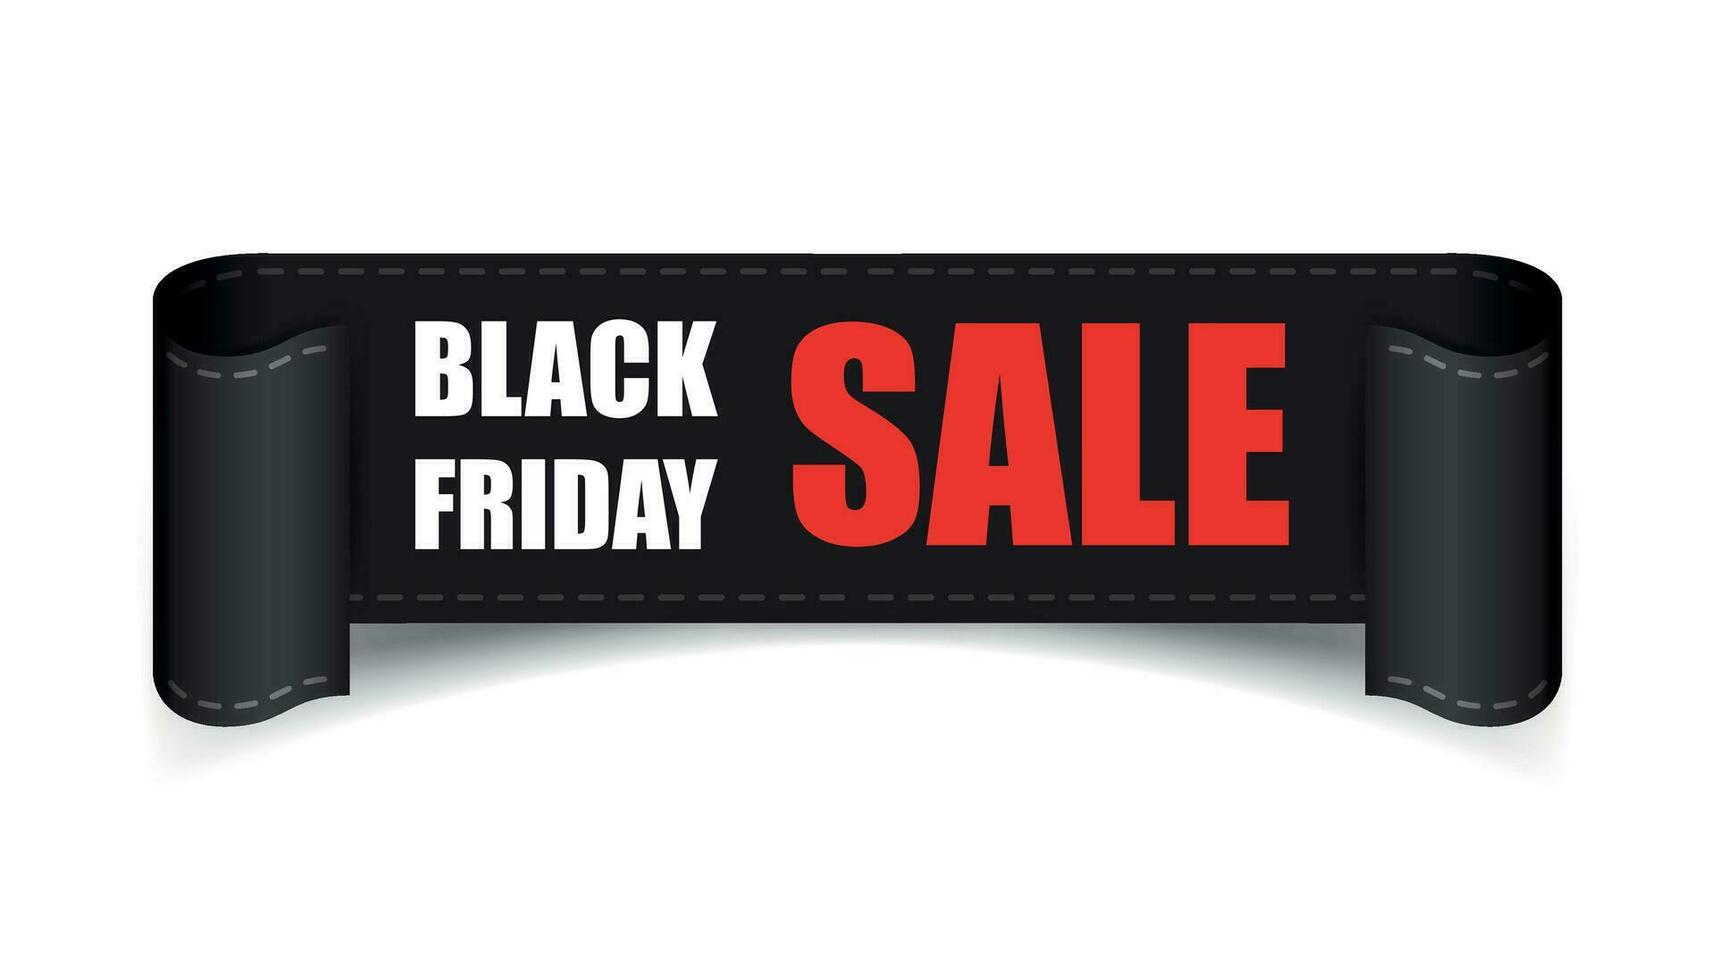 Black friday sales tag. Discount sticker vector illustration. Clothes, food, electronics, cars sale.